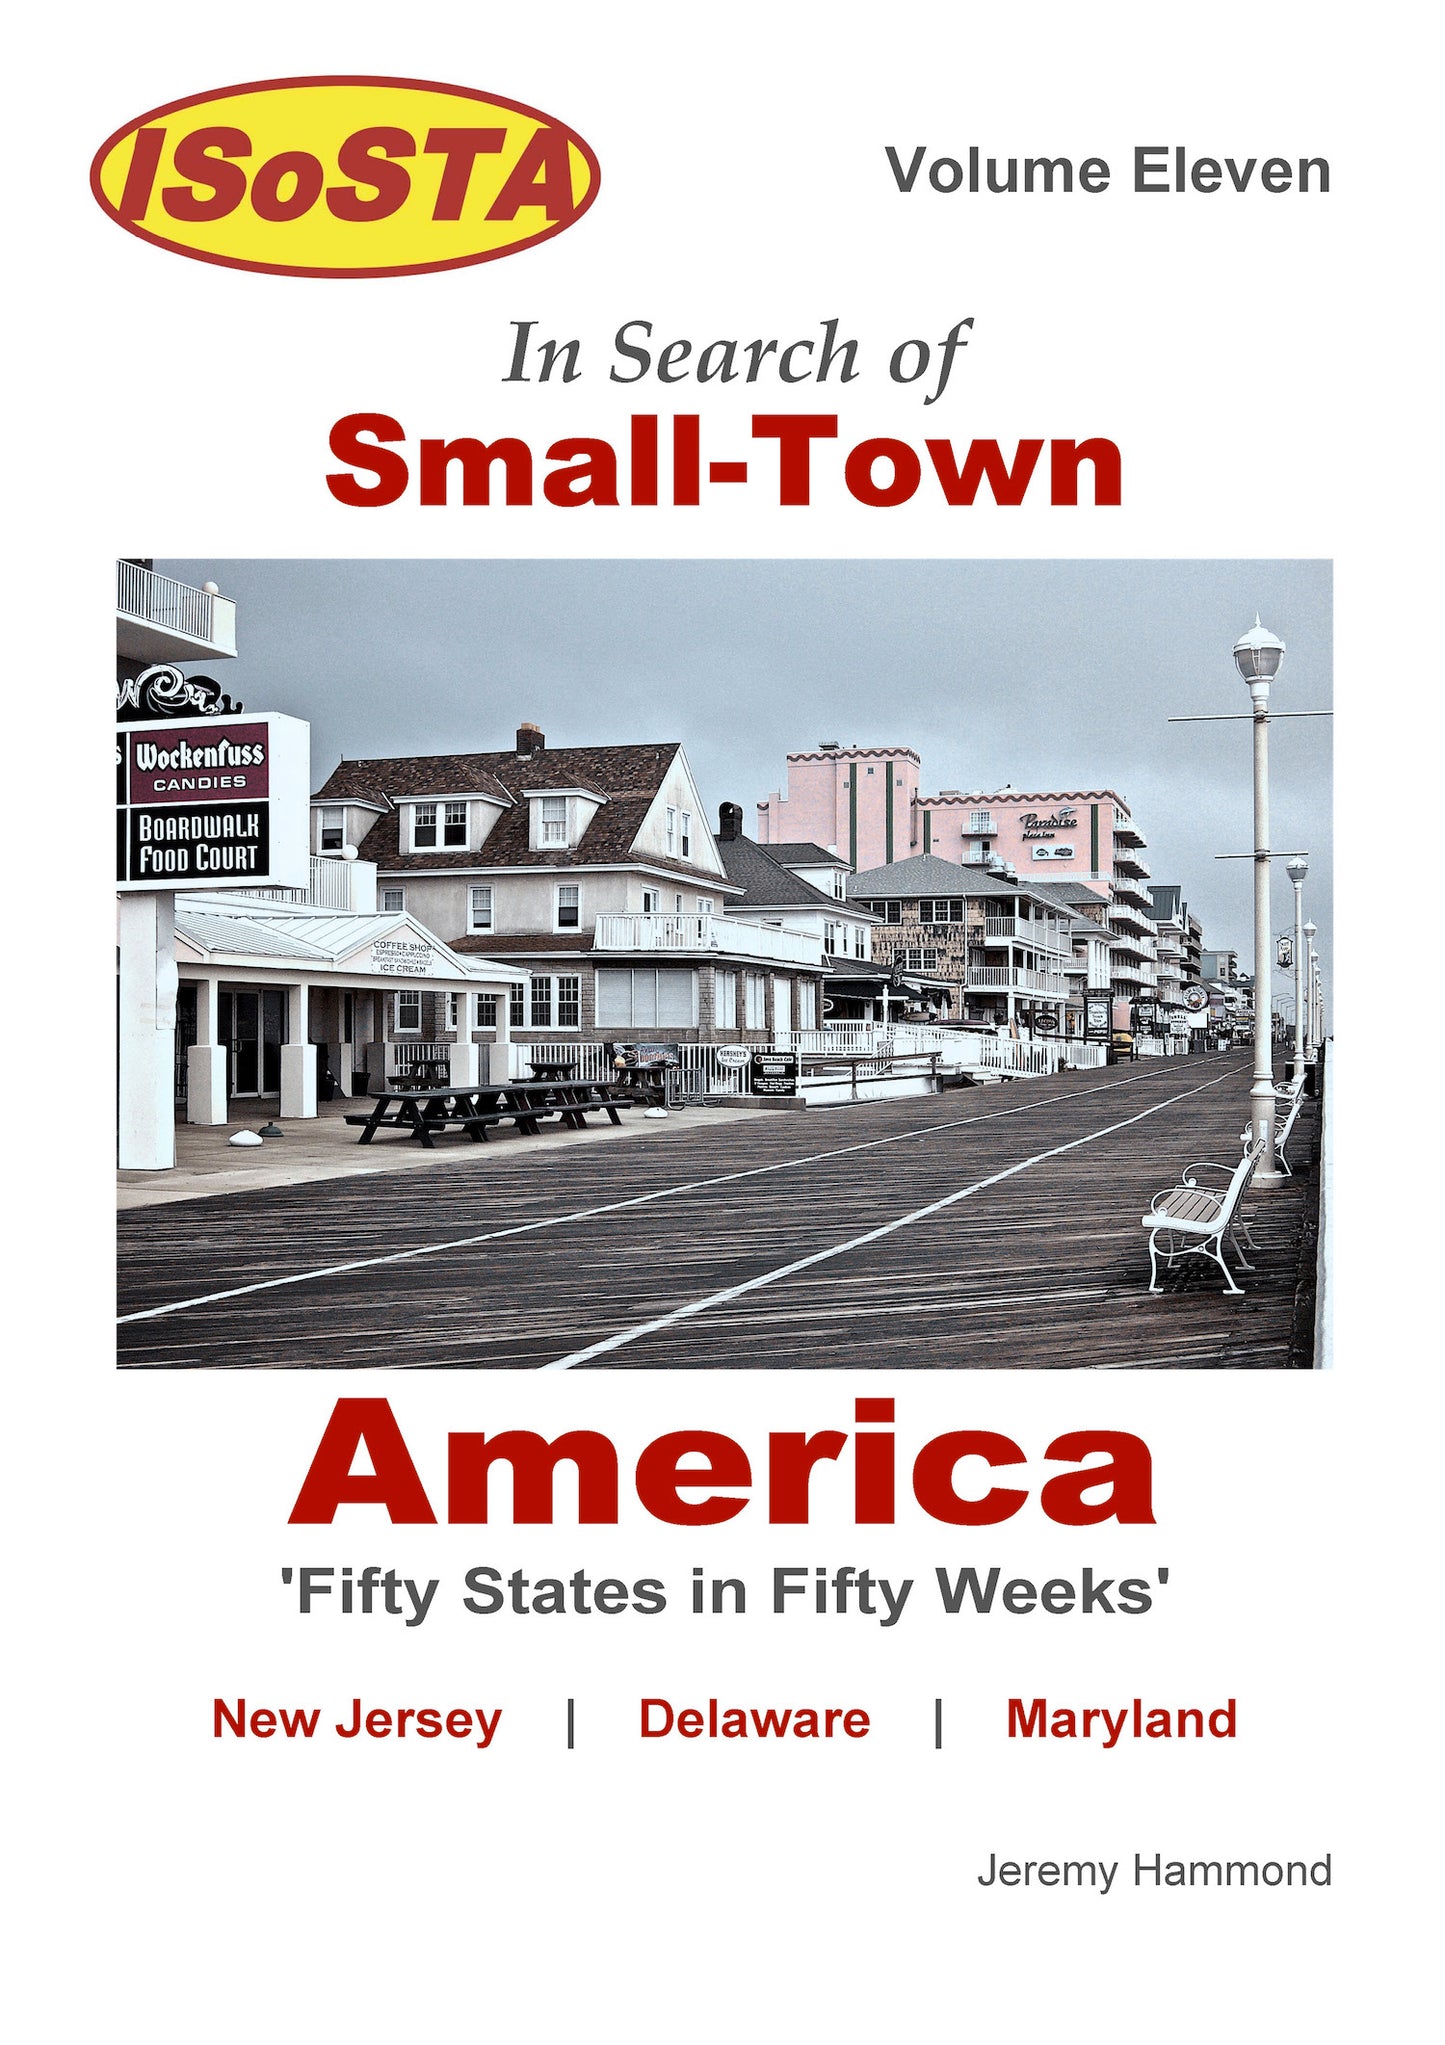 In Search of Small-Town America: Volume 11